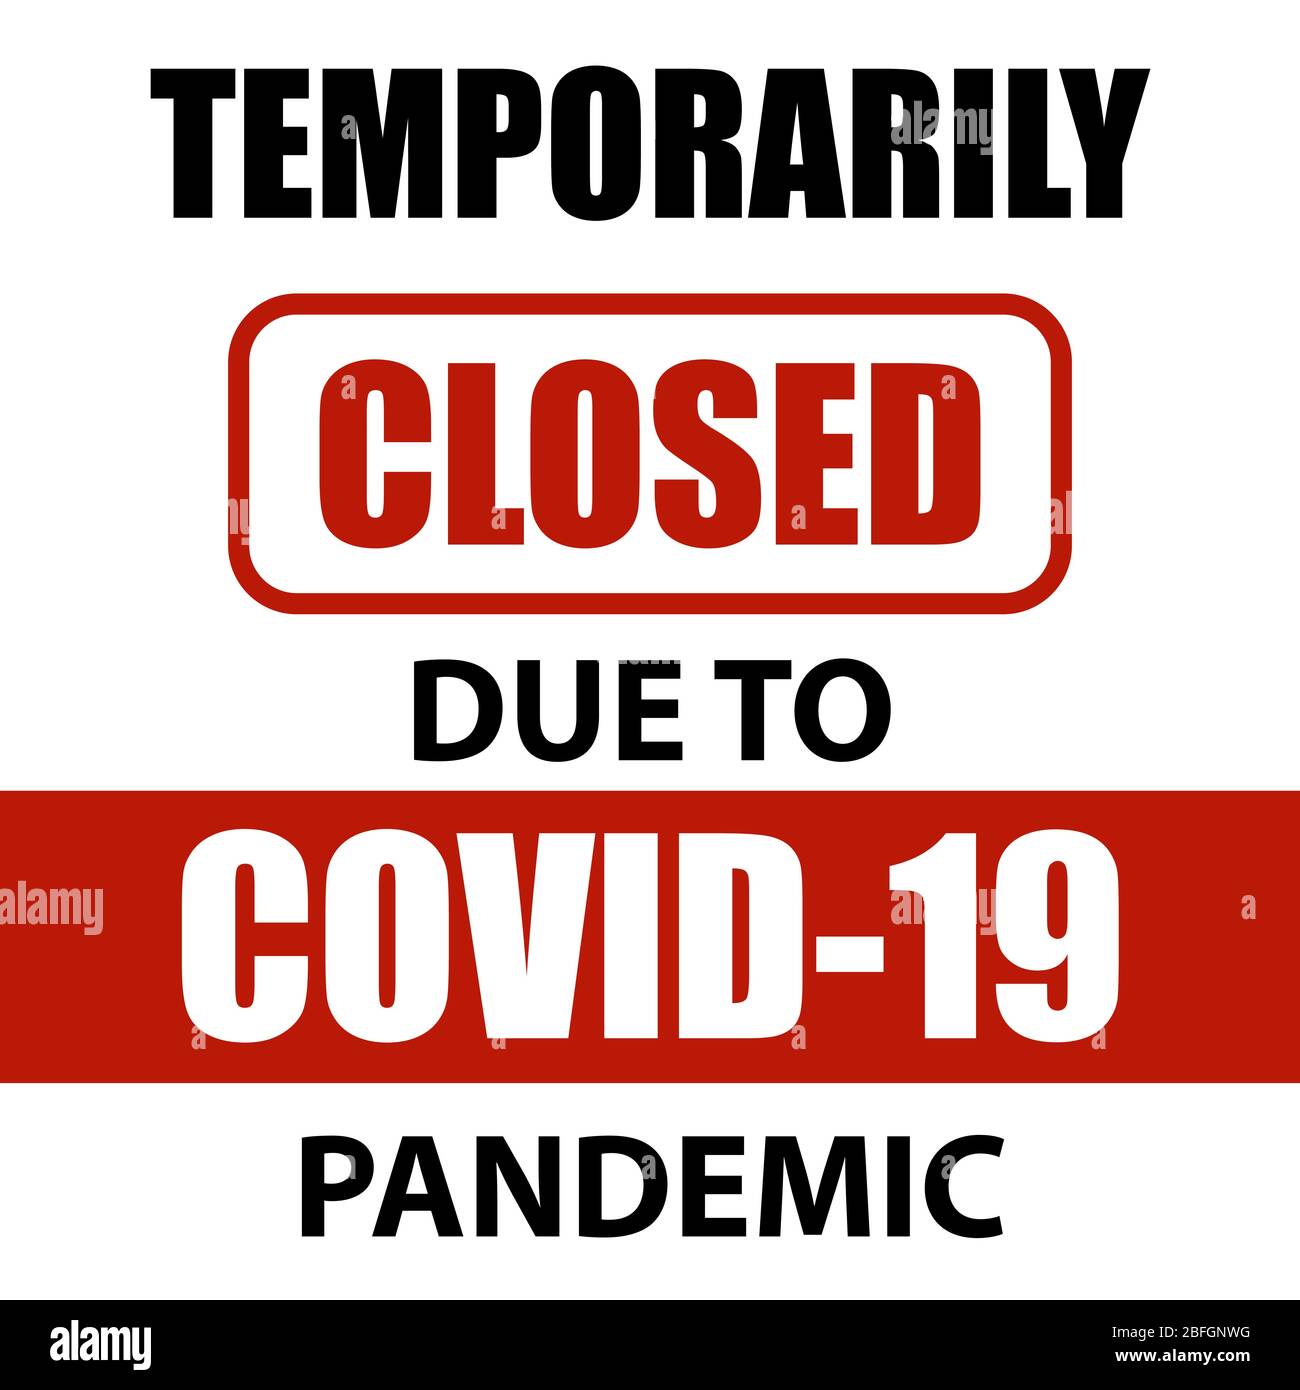 Office temporarily closed sign of coronavirus . Information warning sign about quarantine measures in public places. Restriction and caution COVID-19. Stock Vector